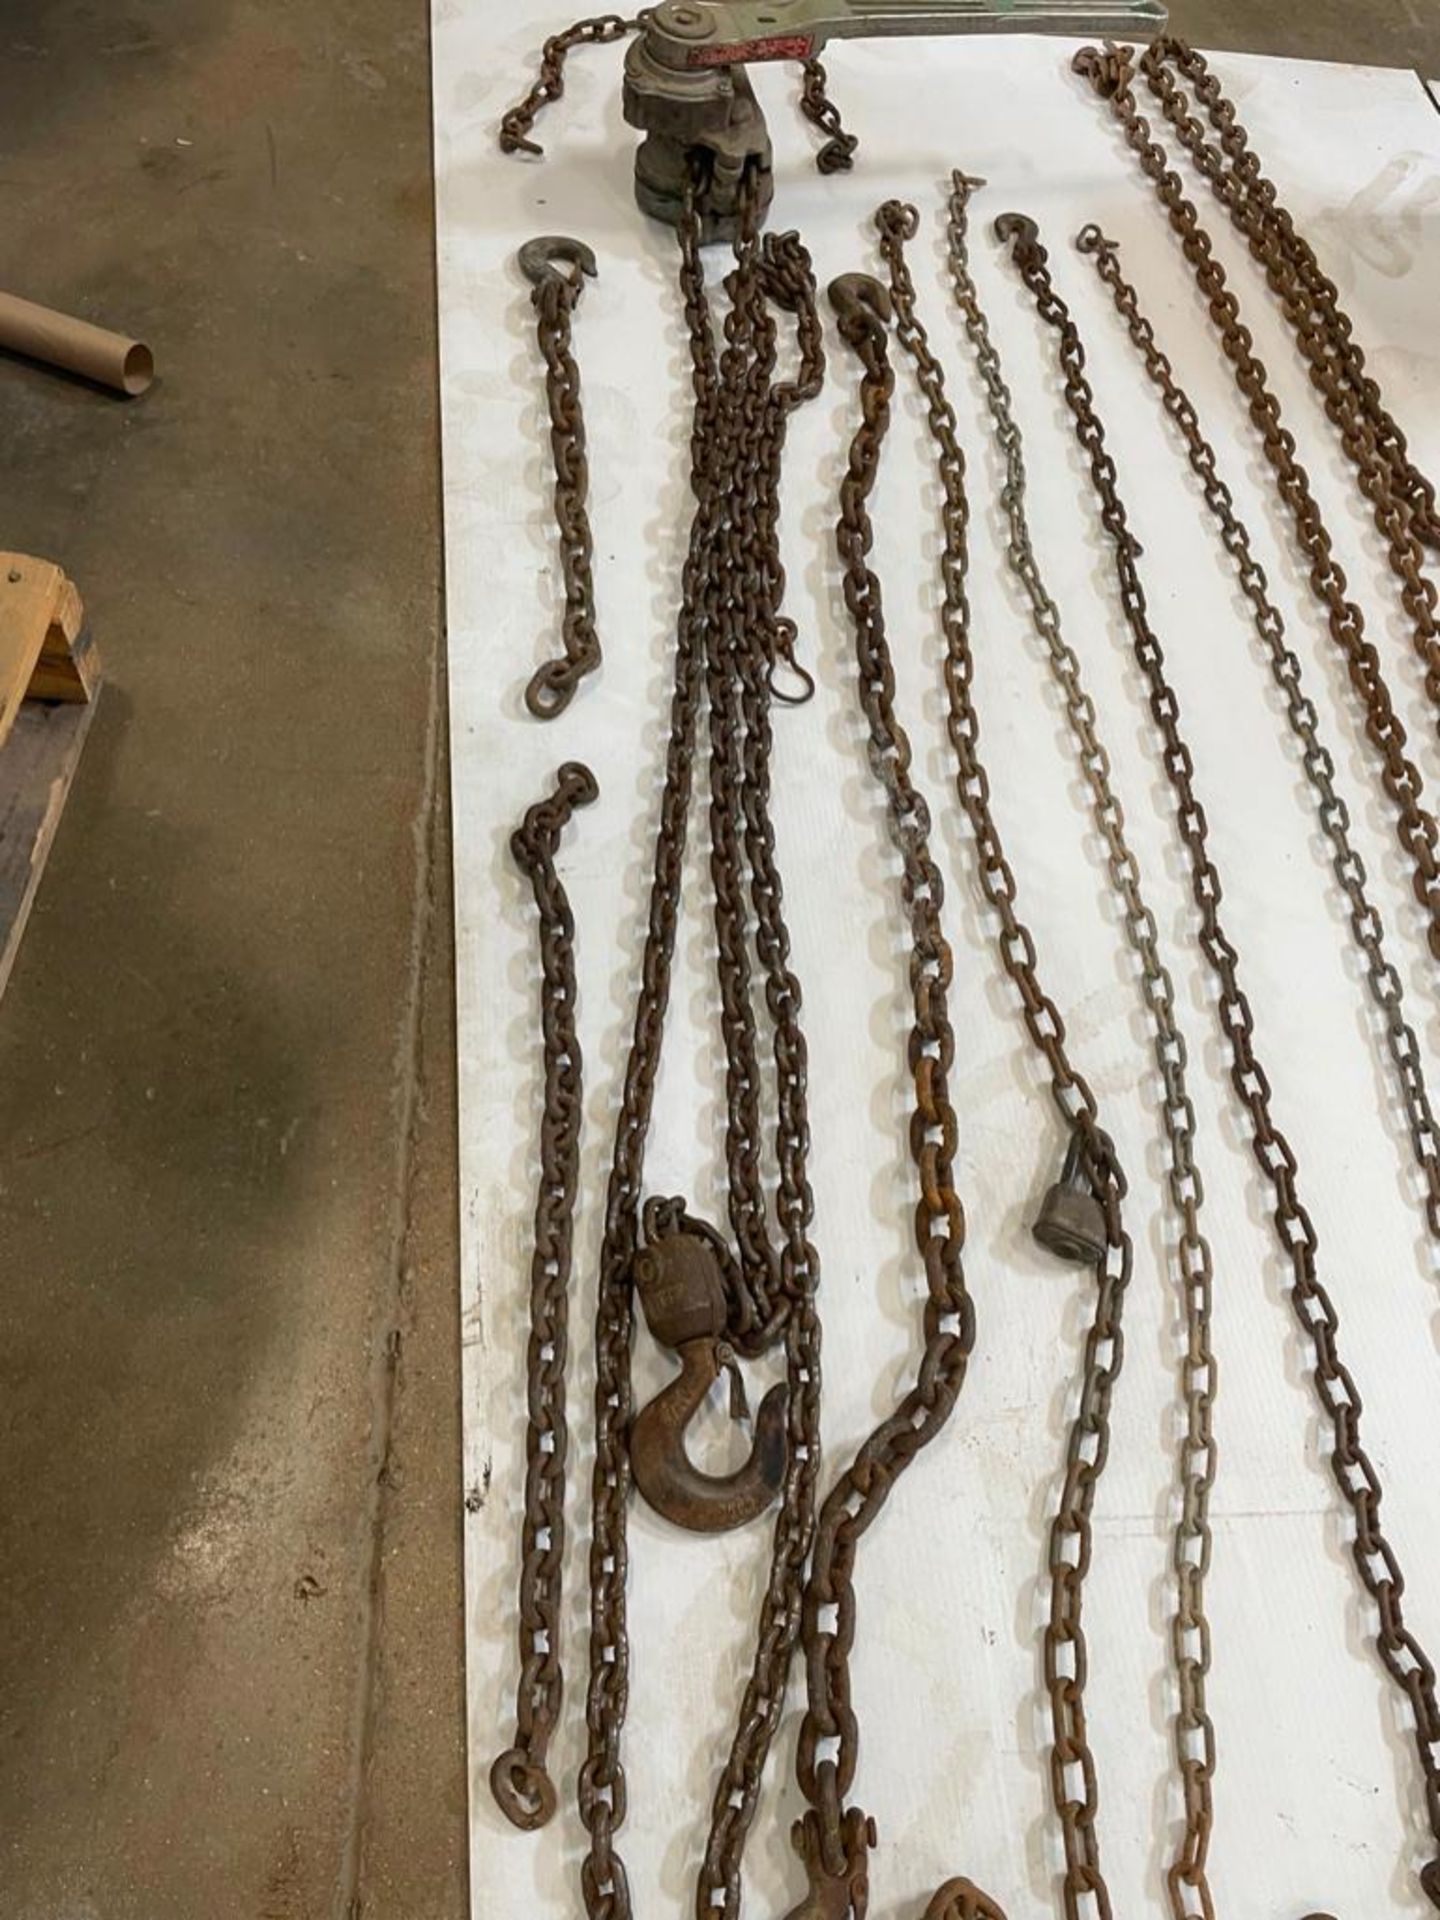 Miscellaneous Chains, Pulley, & Hooks. Located in Hazelwood, MO - Image 4 of 7